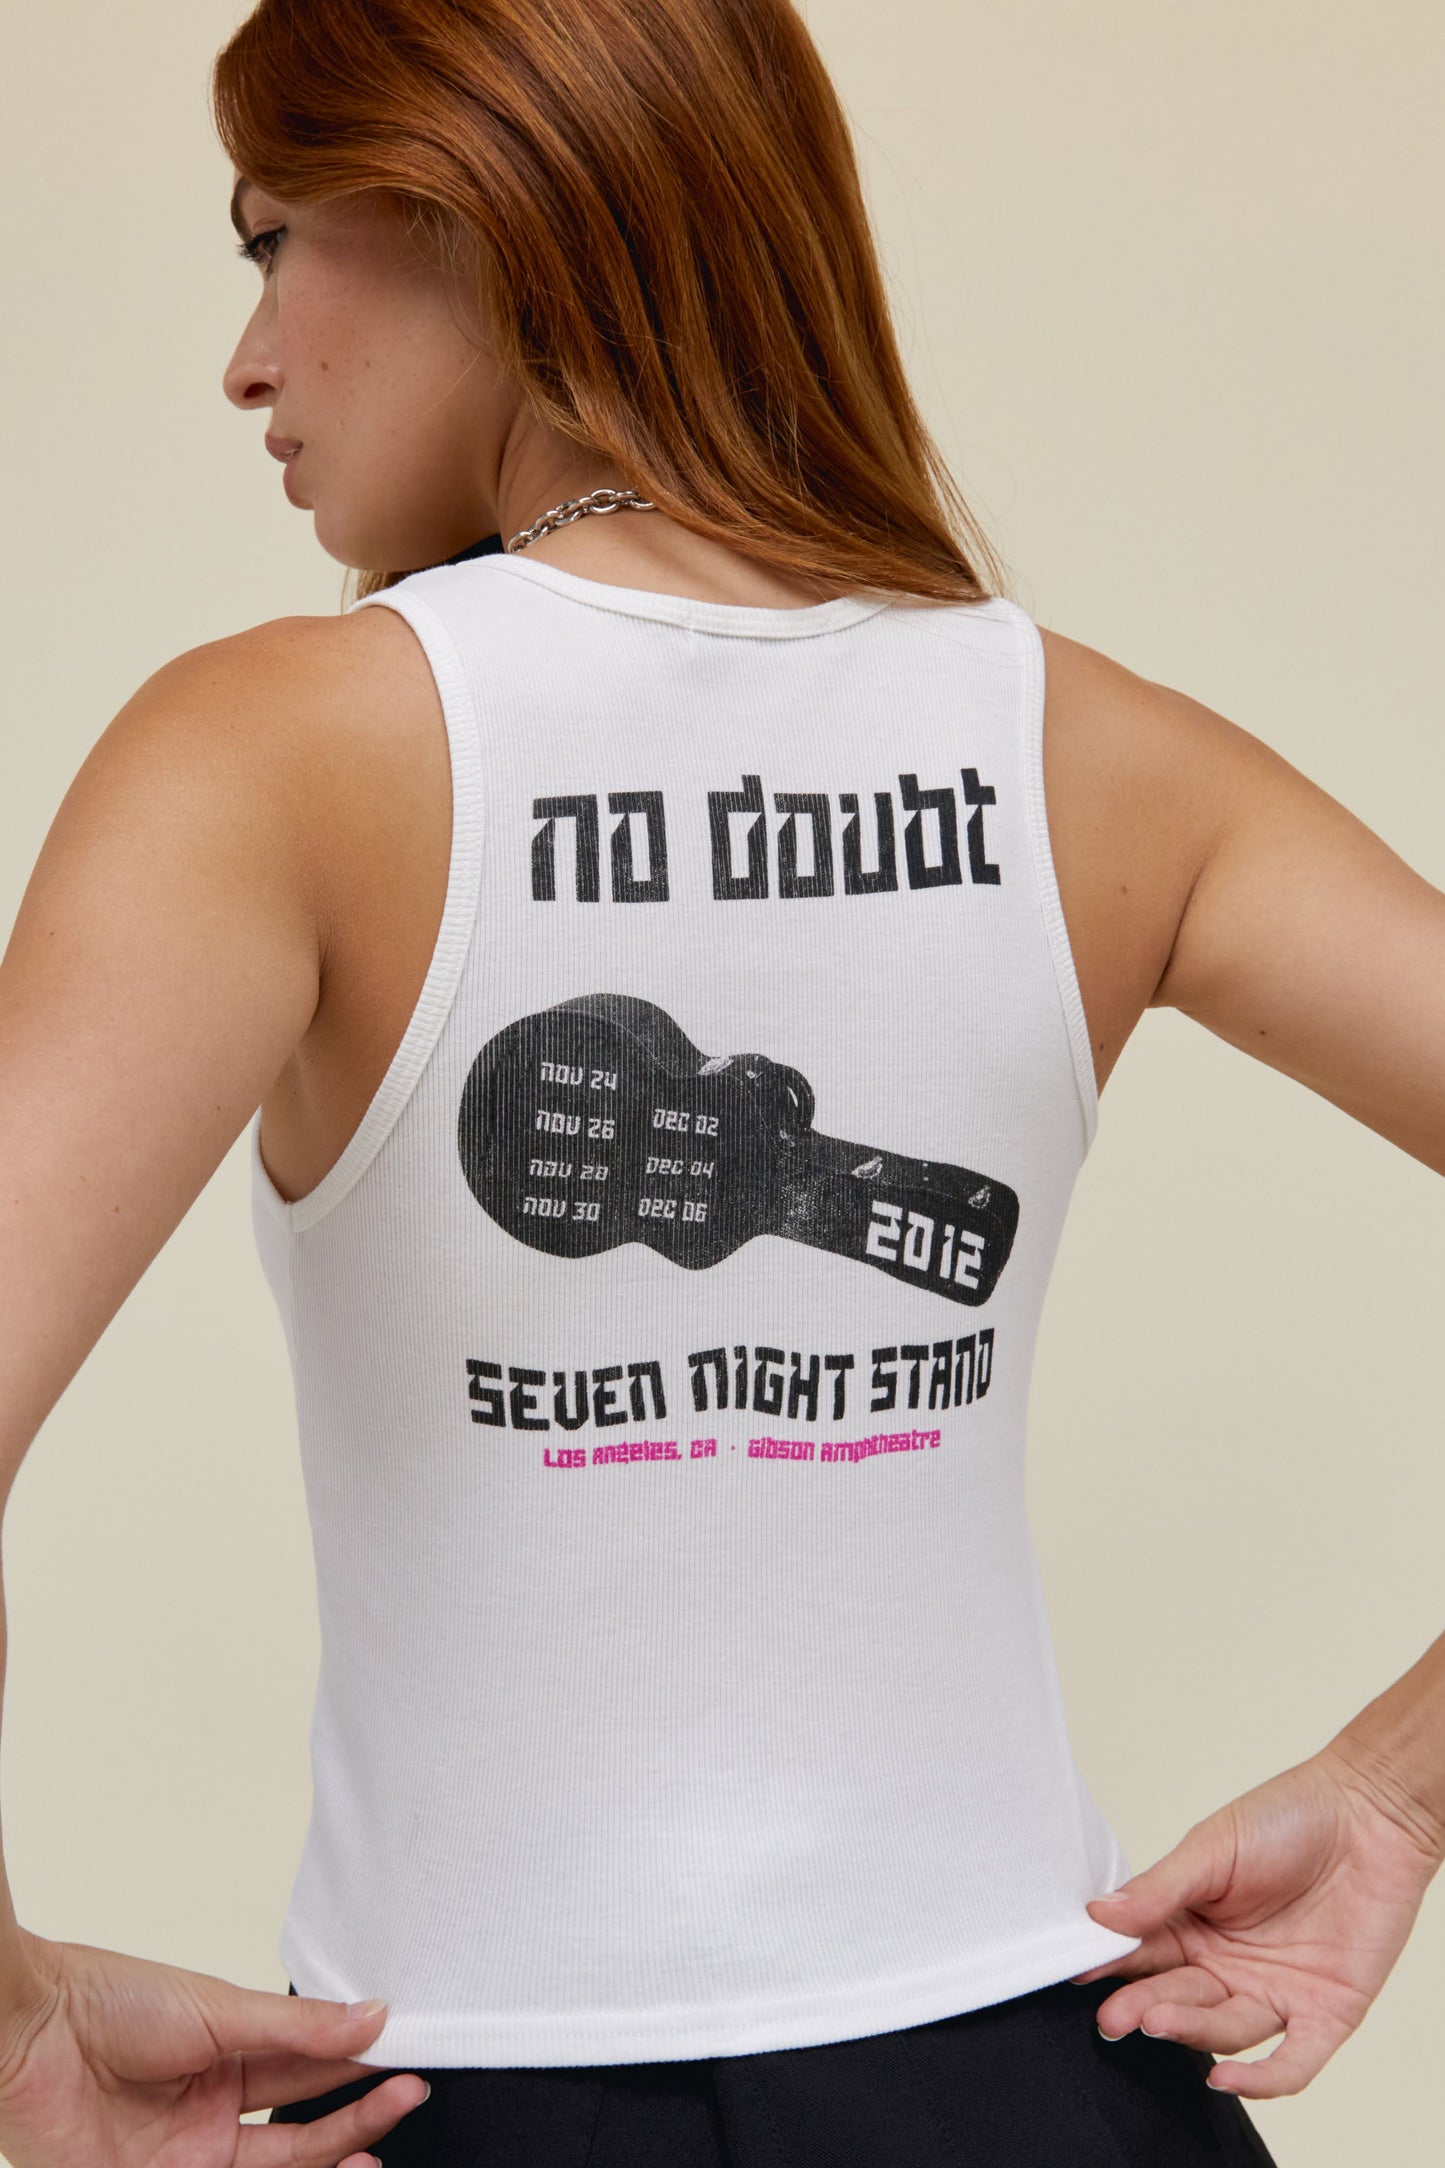 Model wearing a No Doubt graphic tank in white stamped with a rendition of No Doubt’s logo, designed with a black and white scanned portrait of the crew.